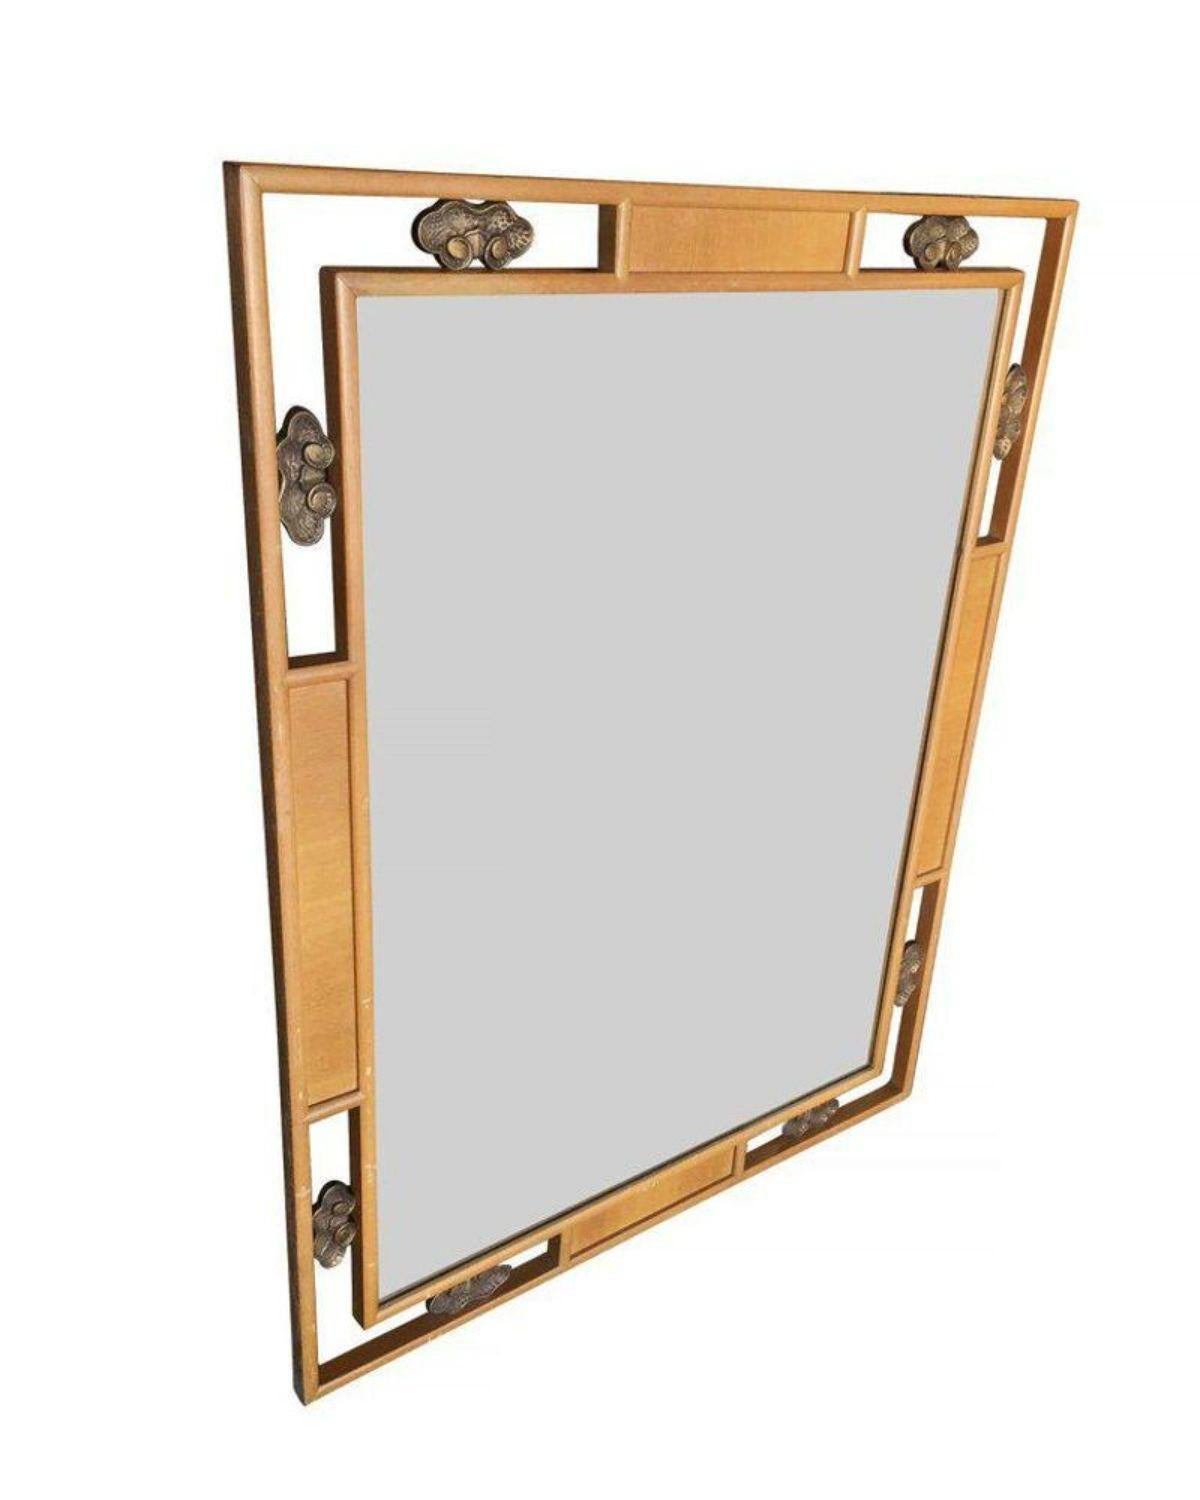 High style mid-century wall mirror with a unique double hardwood frame and bronze accents.